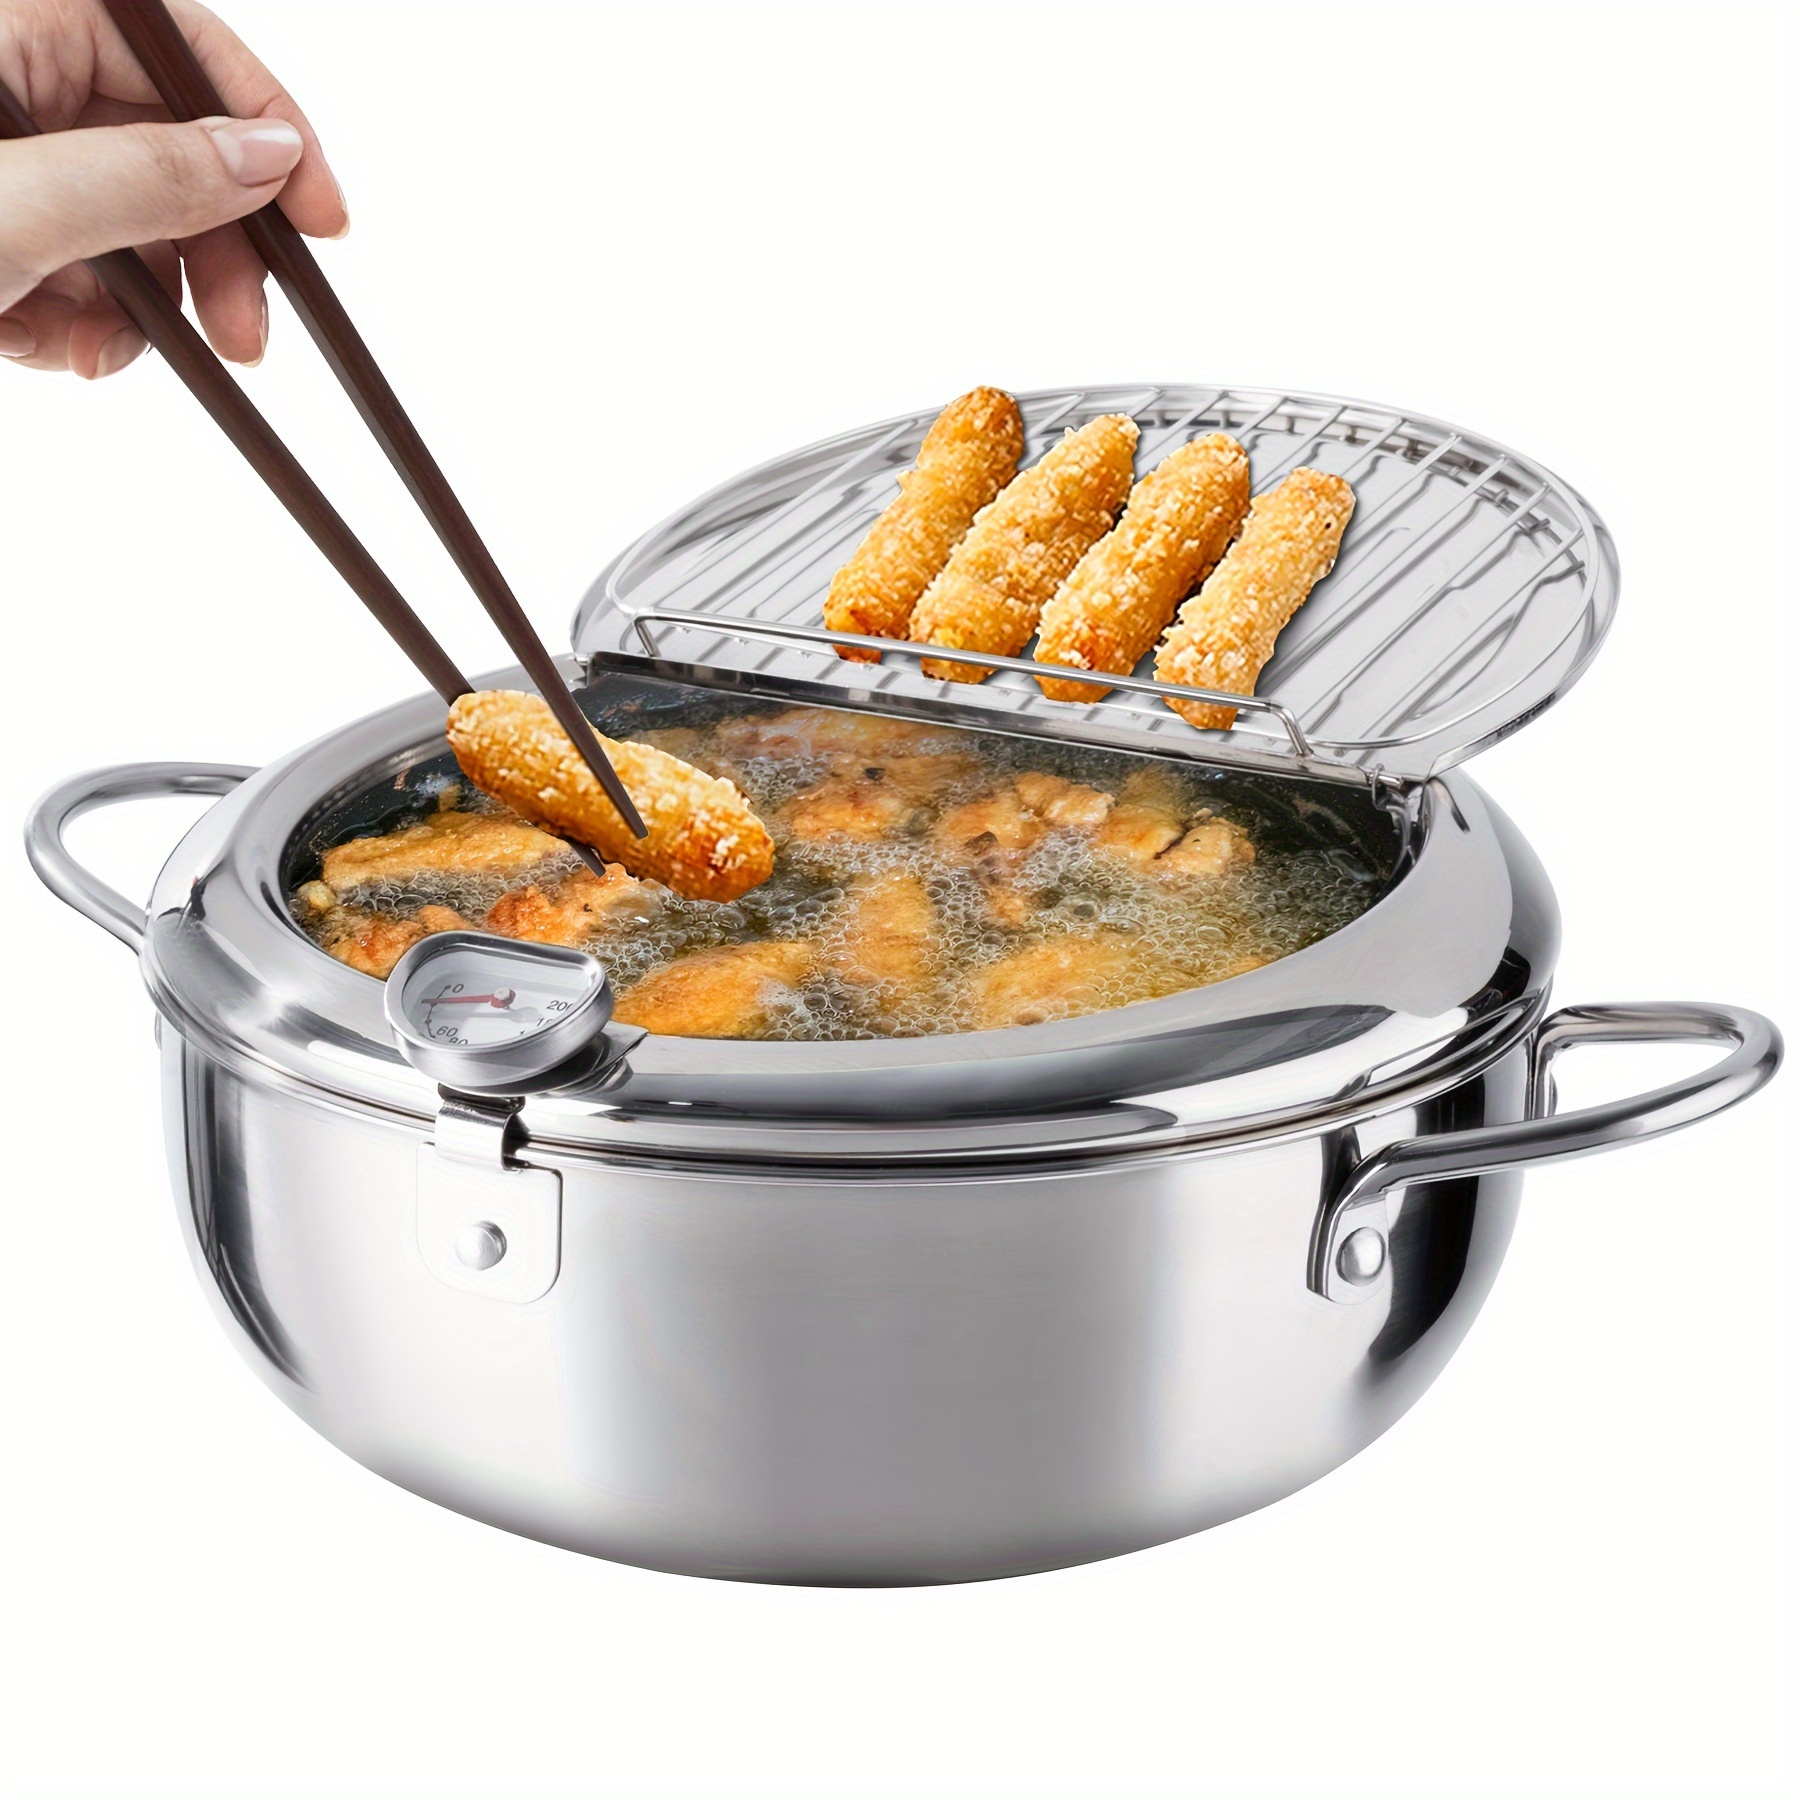 

304 Stainless Steel Deep Fryer Pot Of Janpanese Style: Large Capacity (9.4 Inch/3.4l), Precise Temperature Control, Healthy Oil Drainage, A Kitchen Must-have